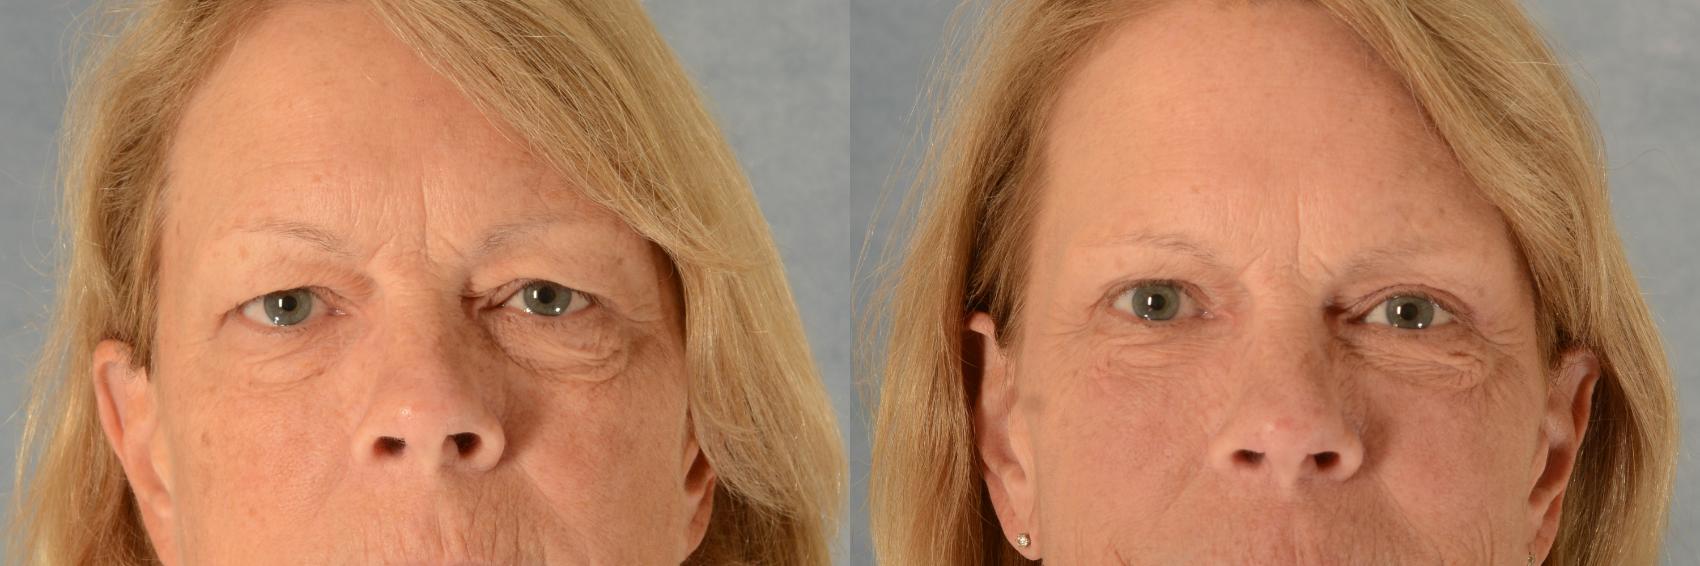 Before & After Eyelid Surgery (Blepharoplasty) Case 550 Front View in Tallahassee, FL